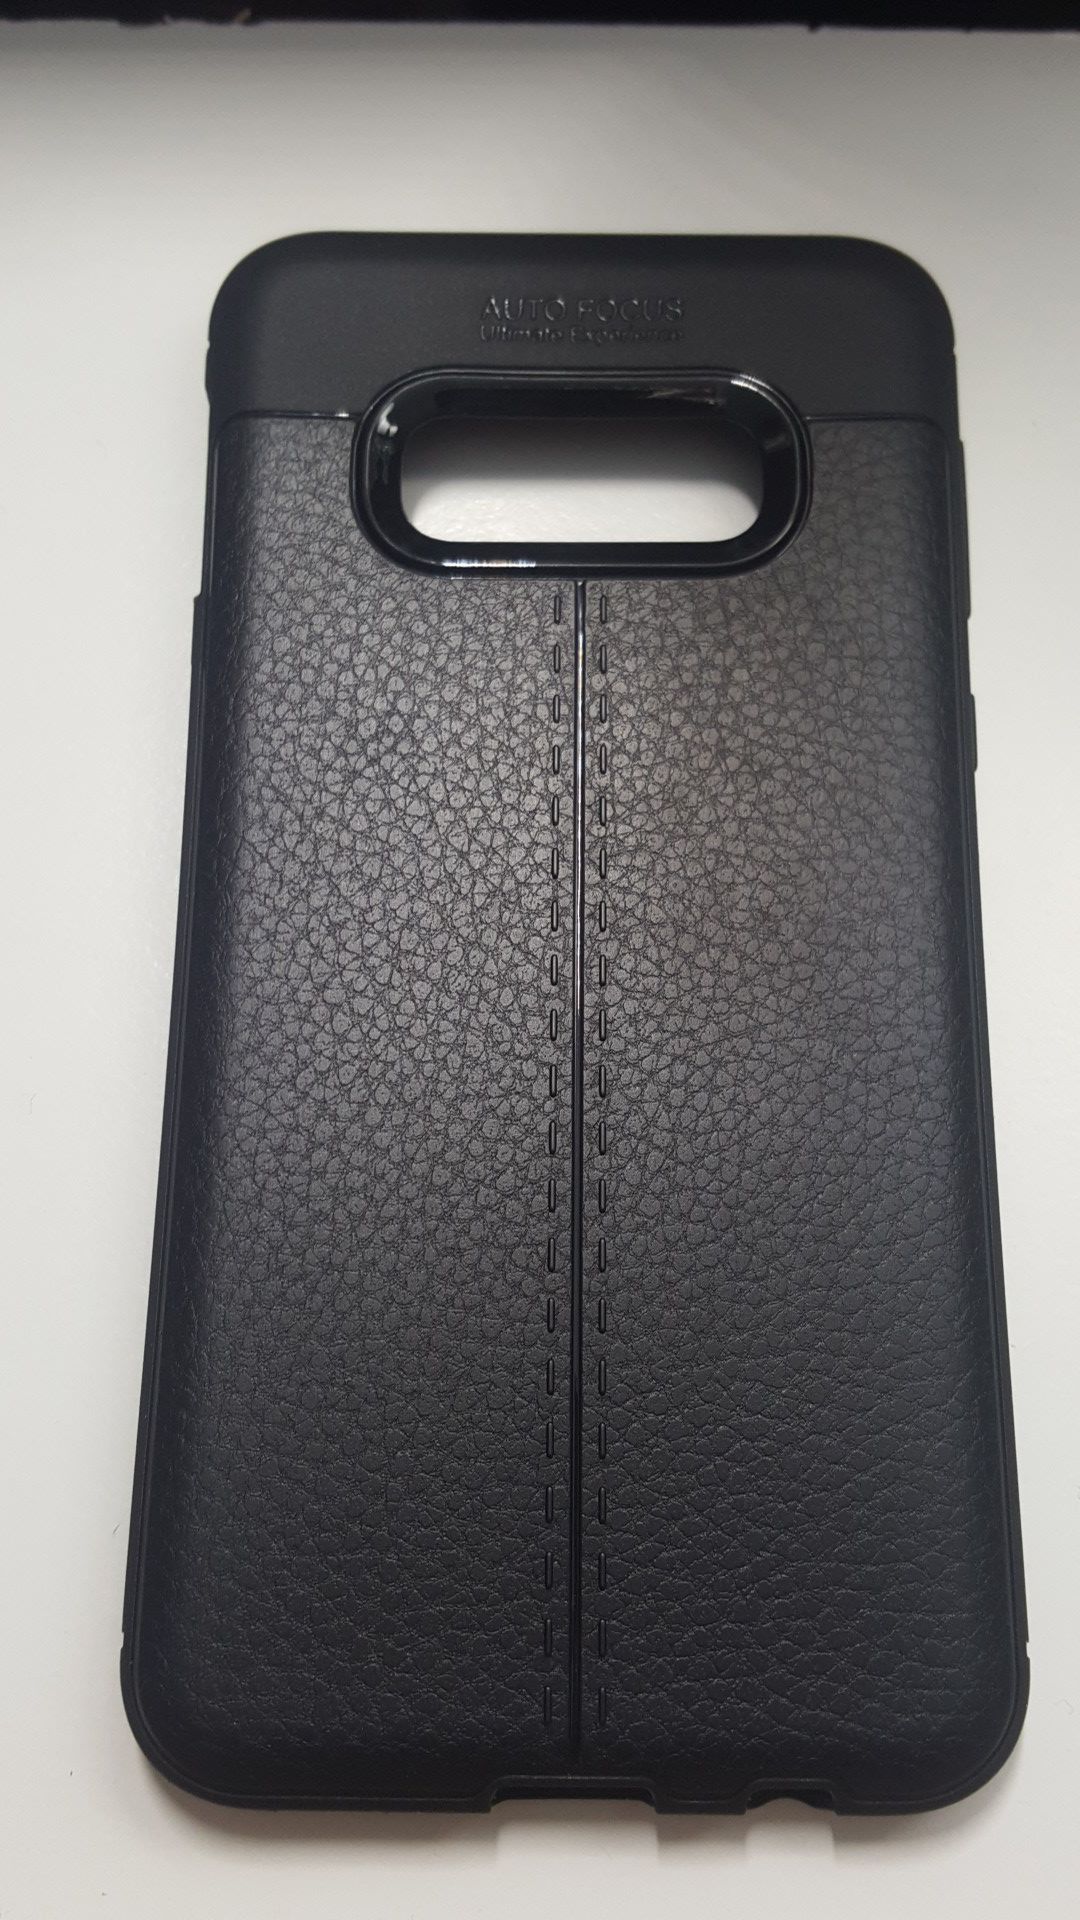 Case for samsung galaxy s10e lite black slimcase new 6firm shiping only